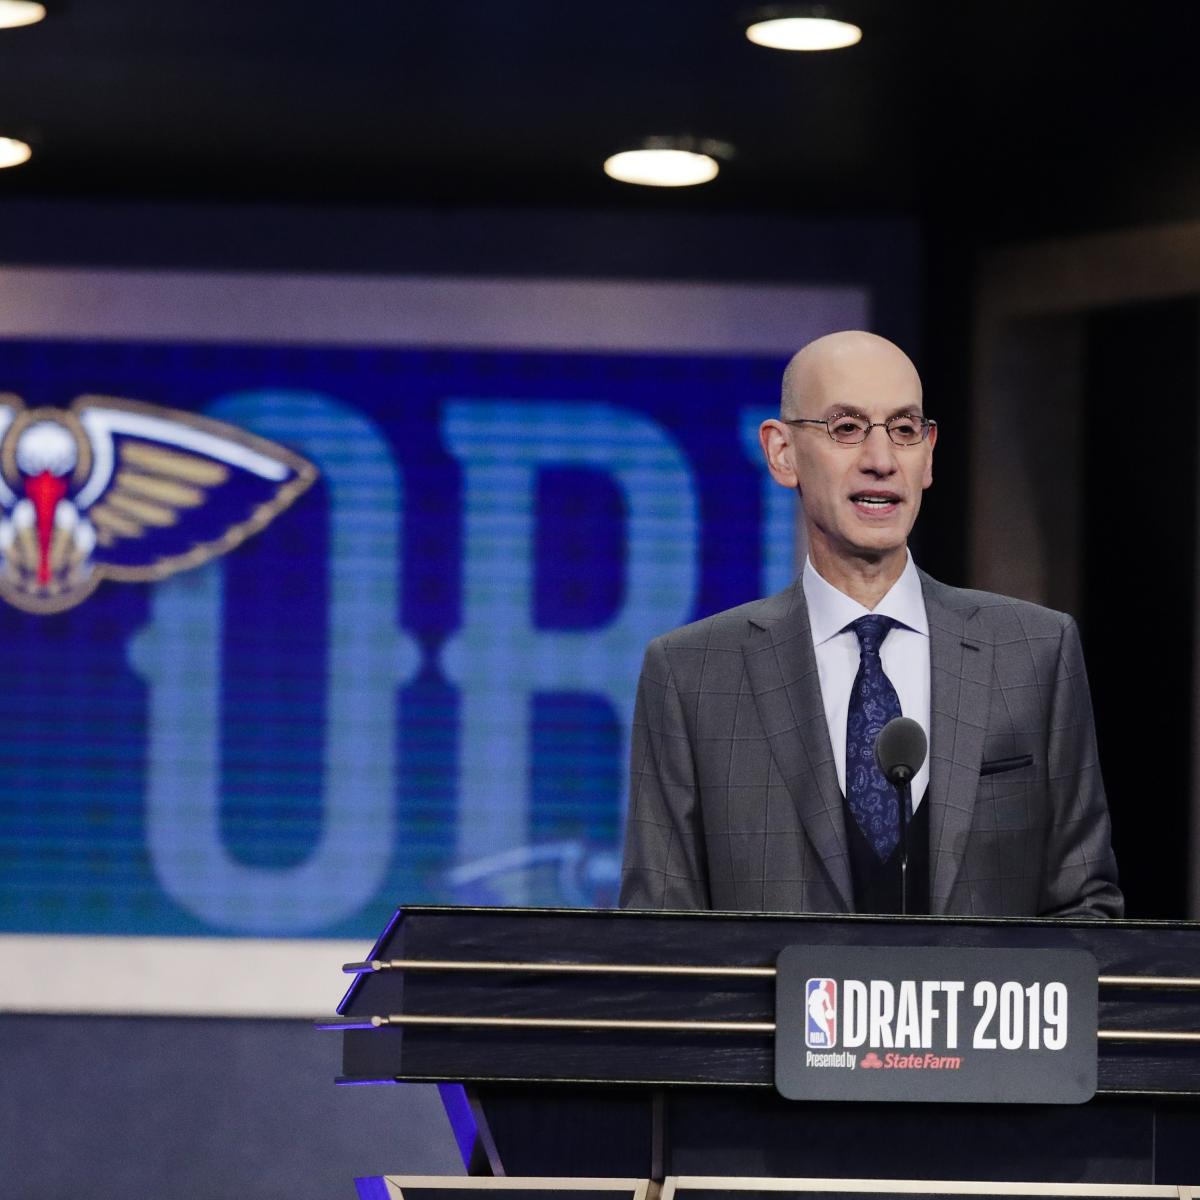 Deliver: 2021 NBA Draft to Be Held July 29; Draft Lottery, Combine Dates Furthermore Space